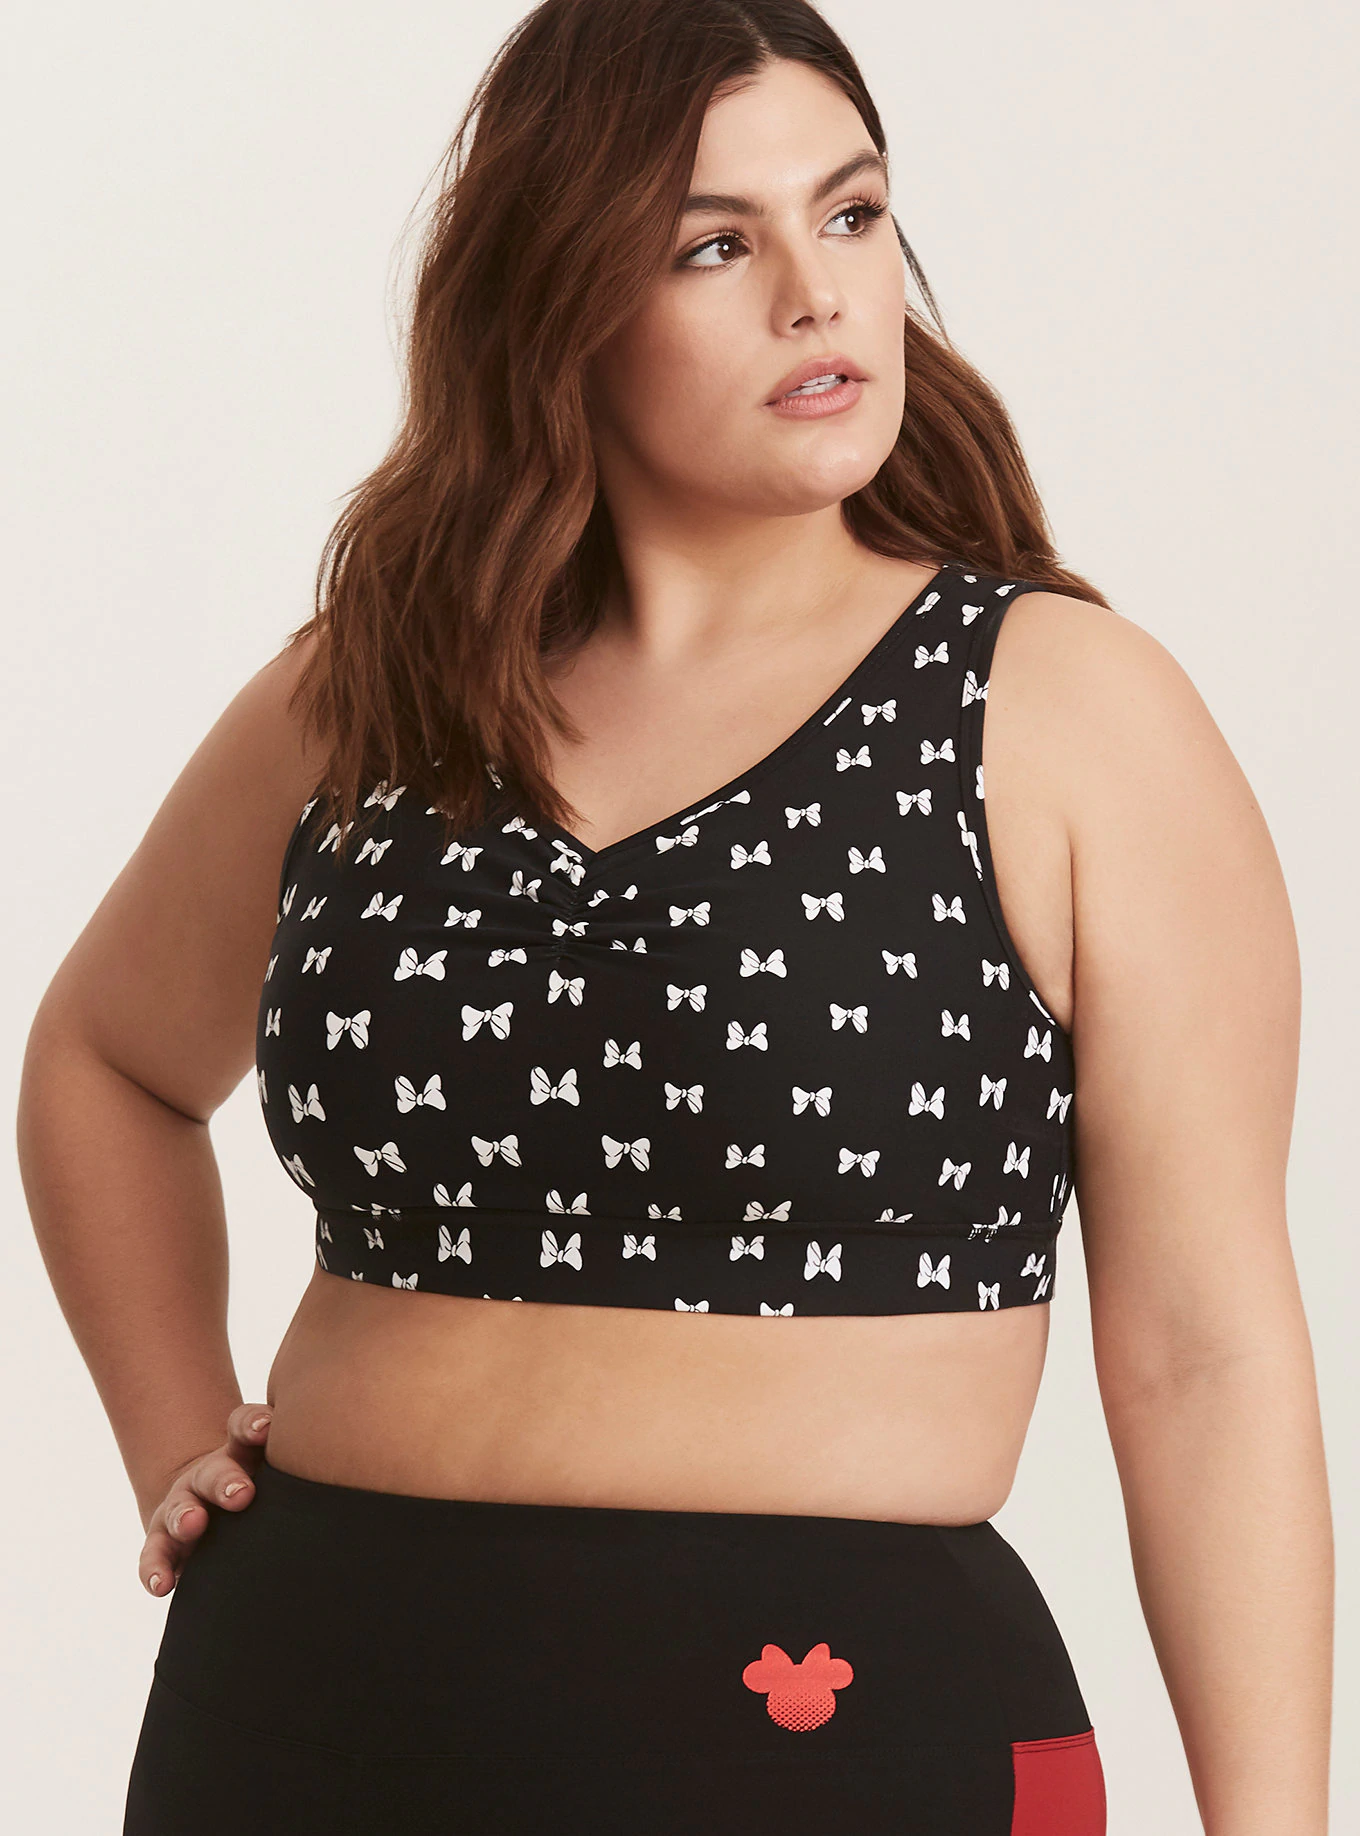 Select Disney Items Now On Sale For 70% Off At Torrid - Shop